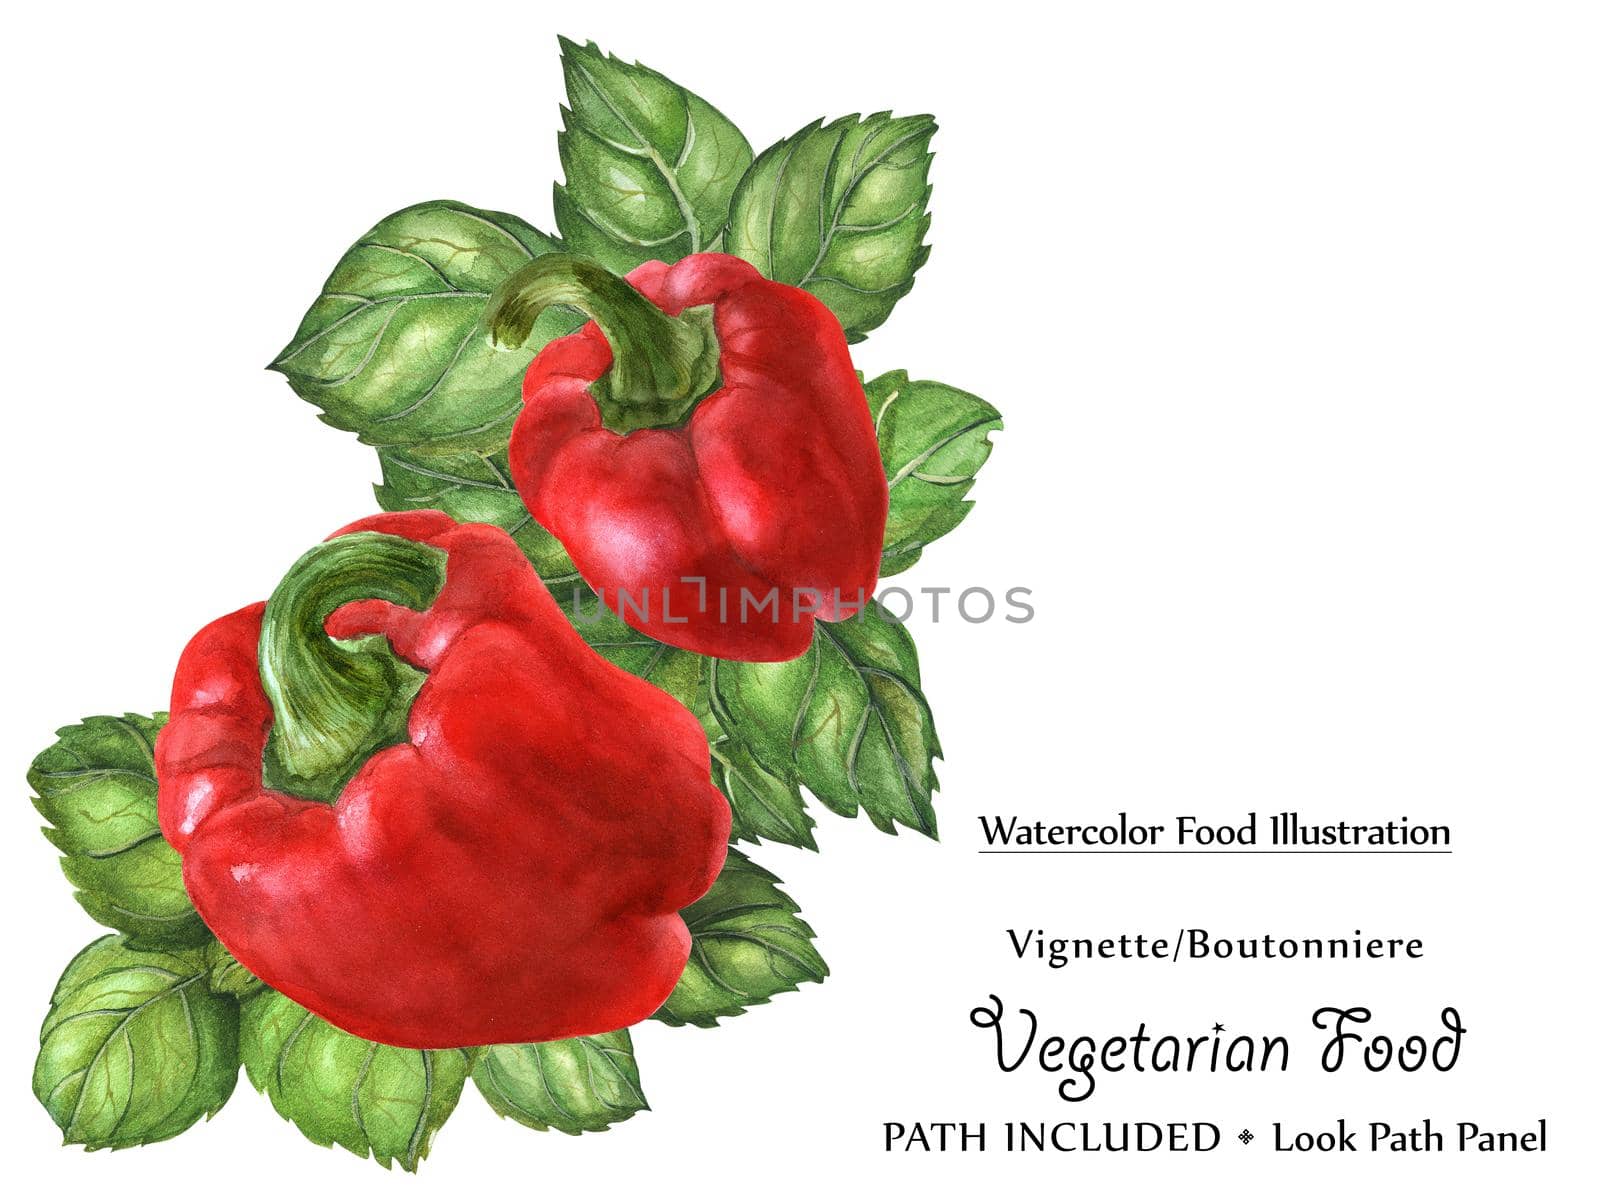 Watercolor vegan vignette biutonniere by freshness green basil leaves and bell peppers. Isolated, clipping path included, vegan design